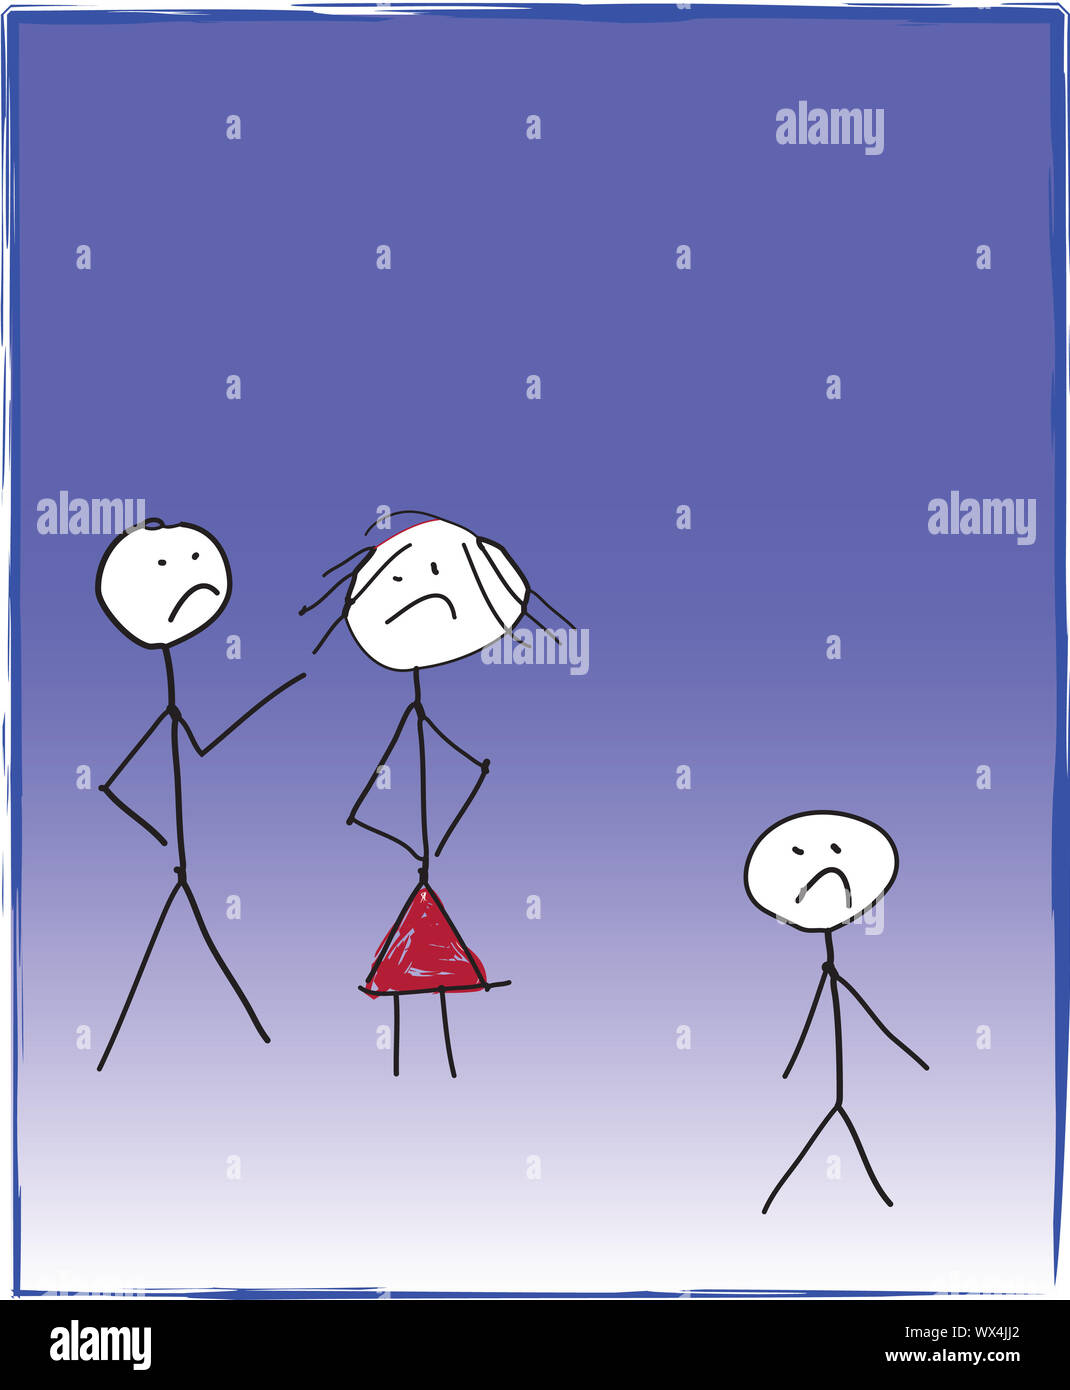 An angry couple fights and argues showing divorce or disagreement, while a child is in the corner very unhappy.  A child like drawing in vector format Stock Photo